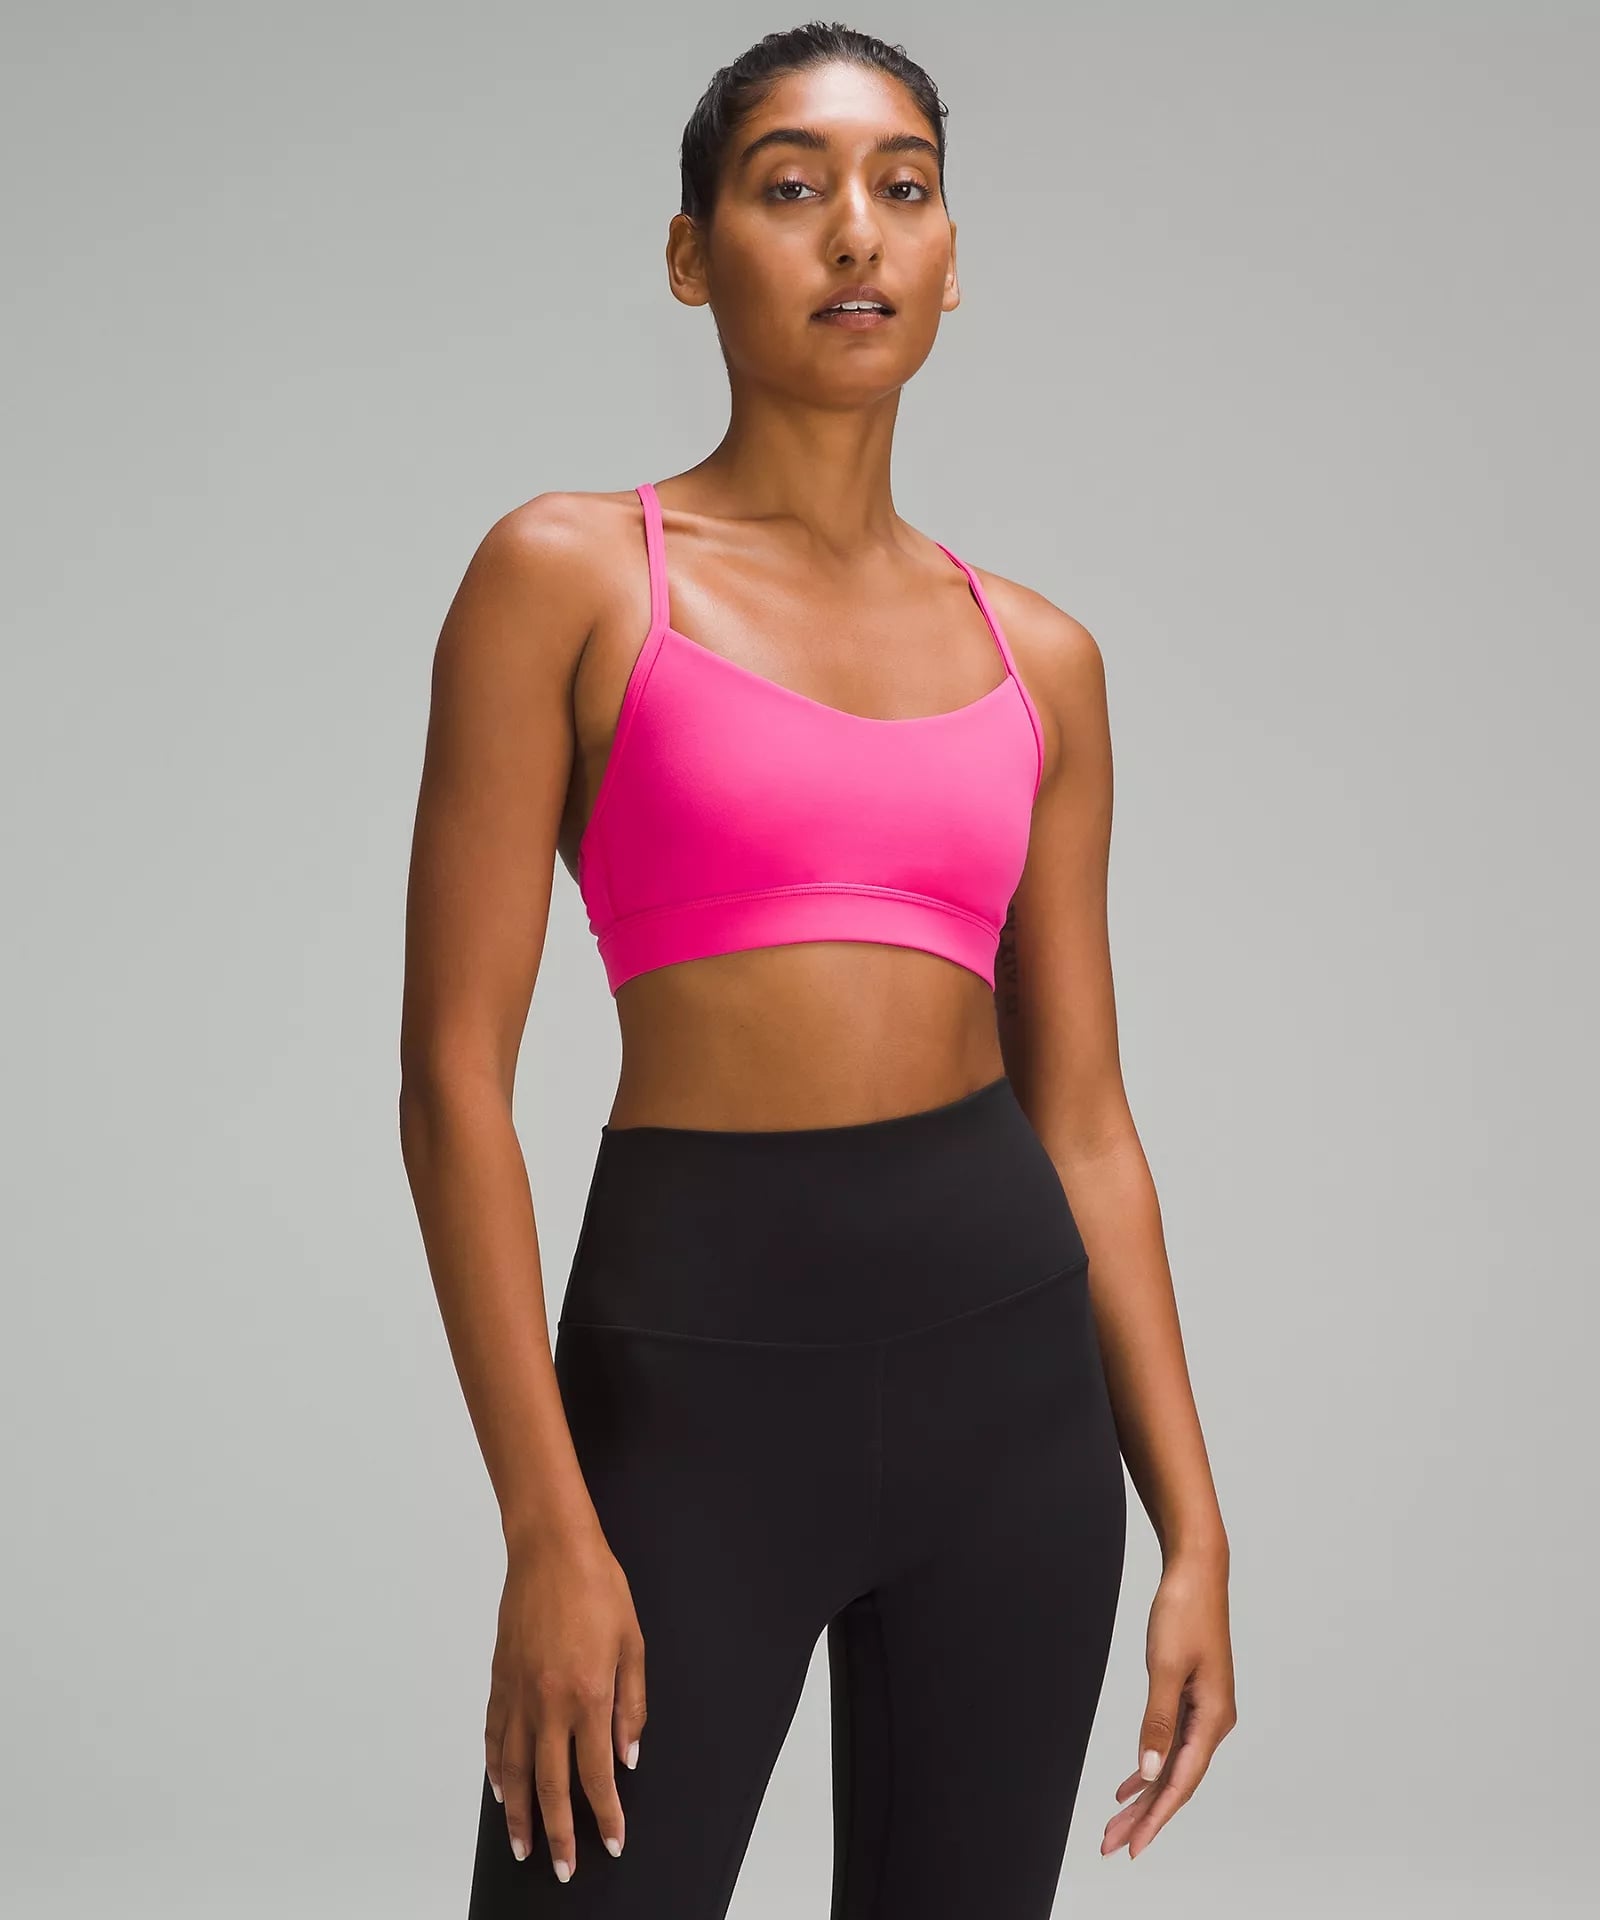 The Best Matching Sets at Lululemon